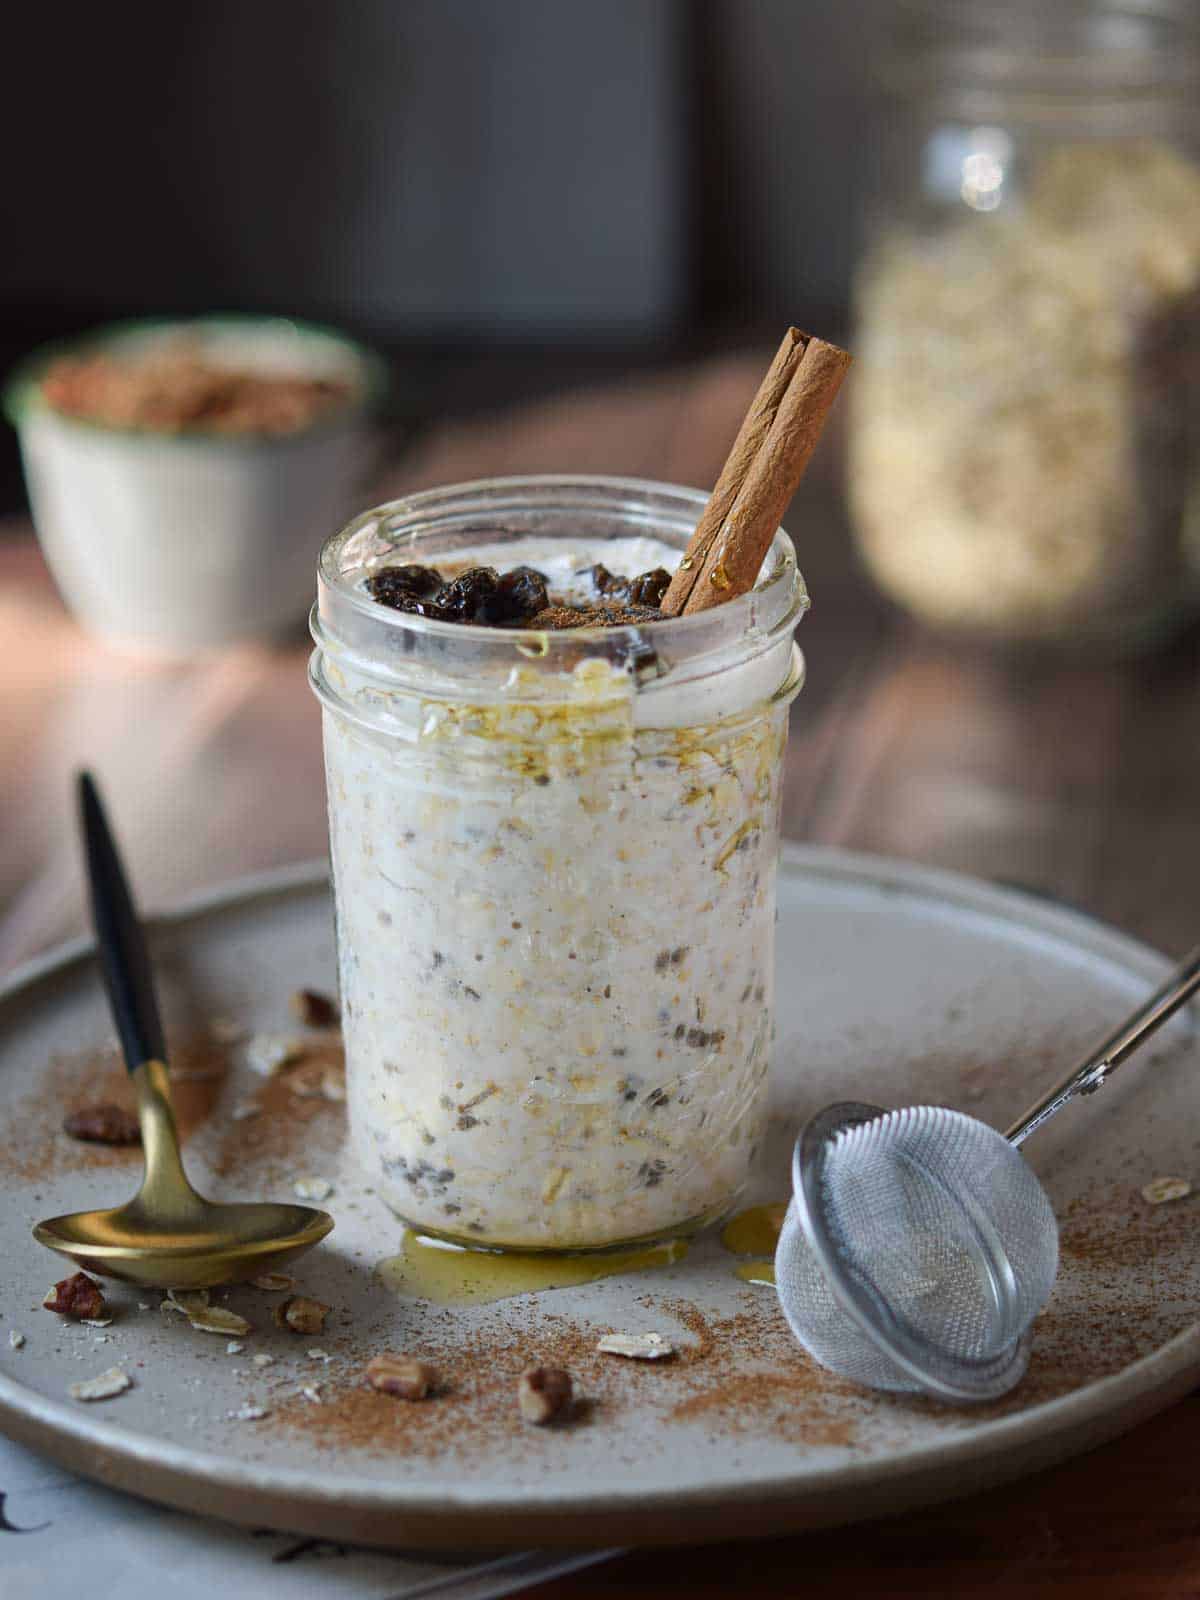 Overnight oats in a jar with cinnamon and raisins.